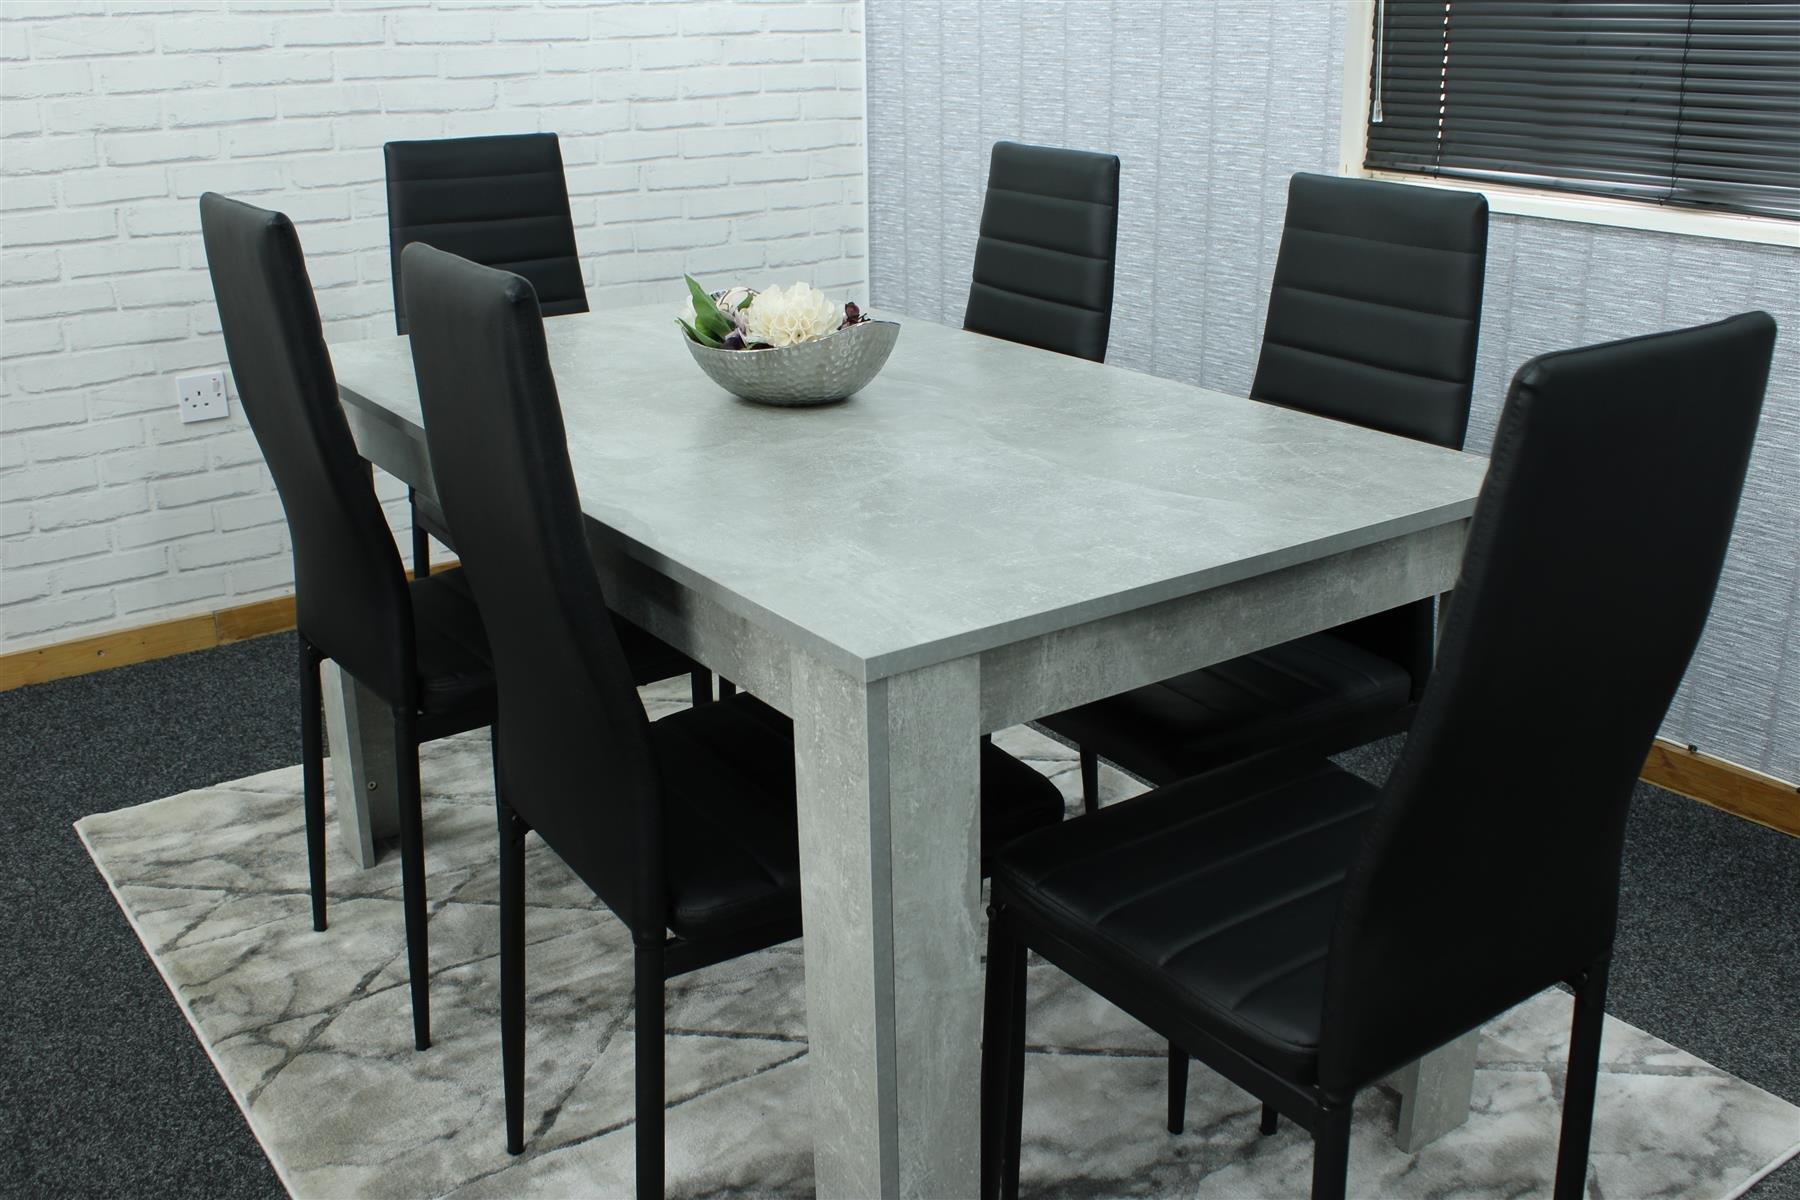 Dining Table and 6 Chairs Stone Grey Effect Wood Table 6 Black Leather Chairs Dining Room